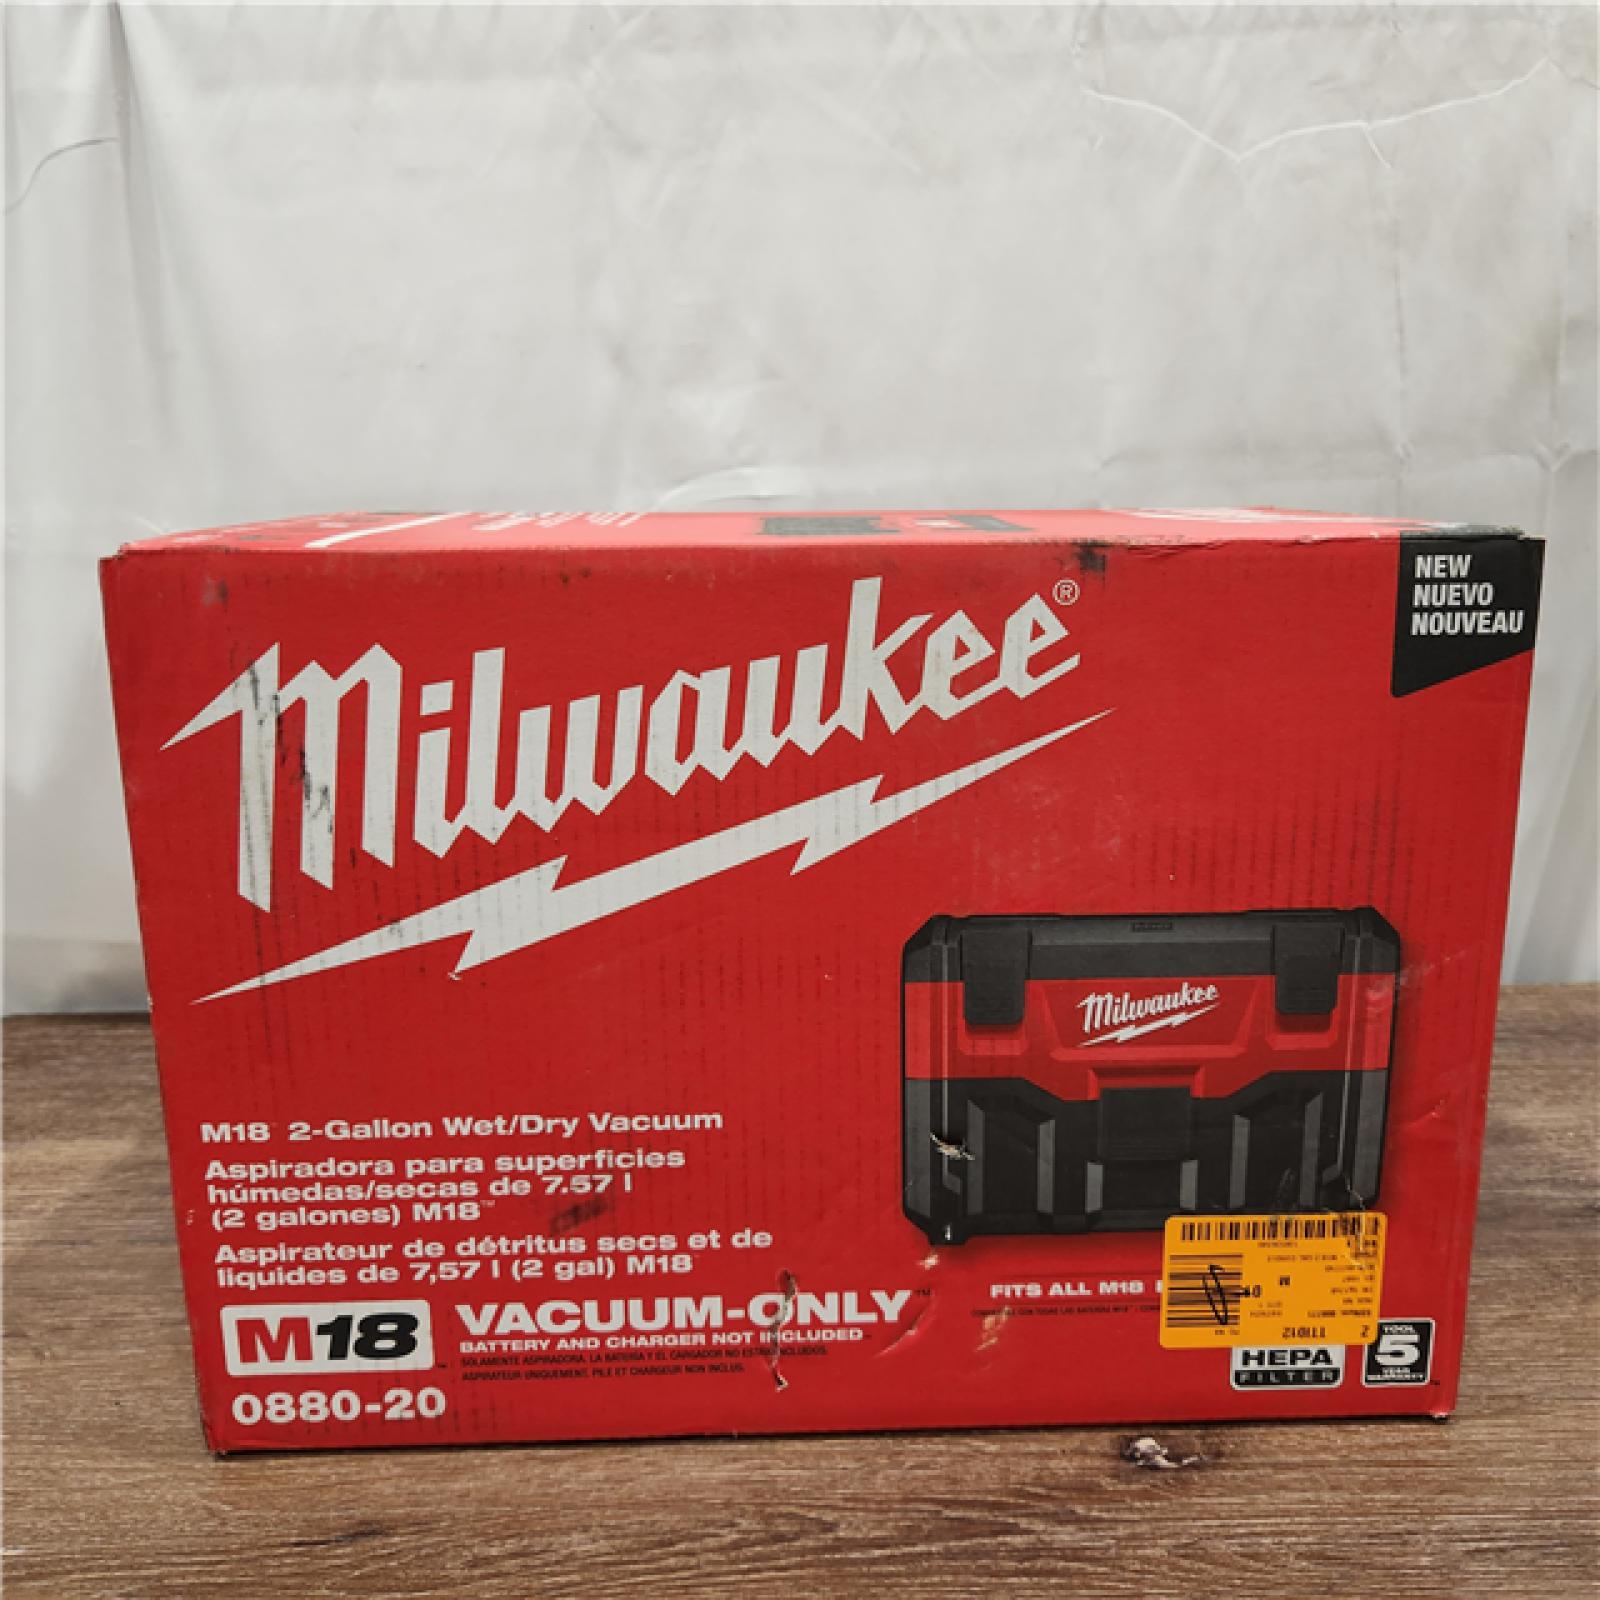 AS-IS Milwaukee  18-Volt Cordless Wet/Dry Vacuum  Red